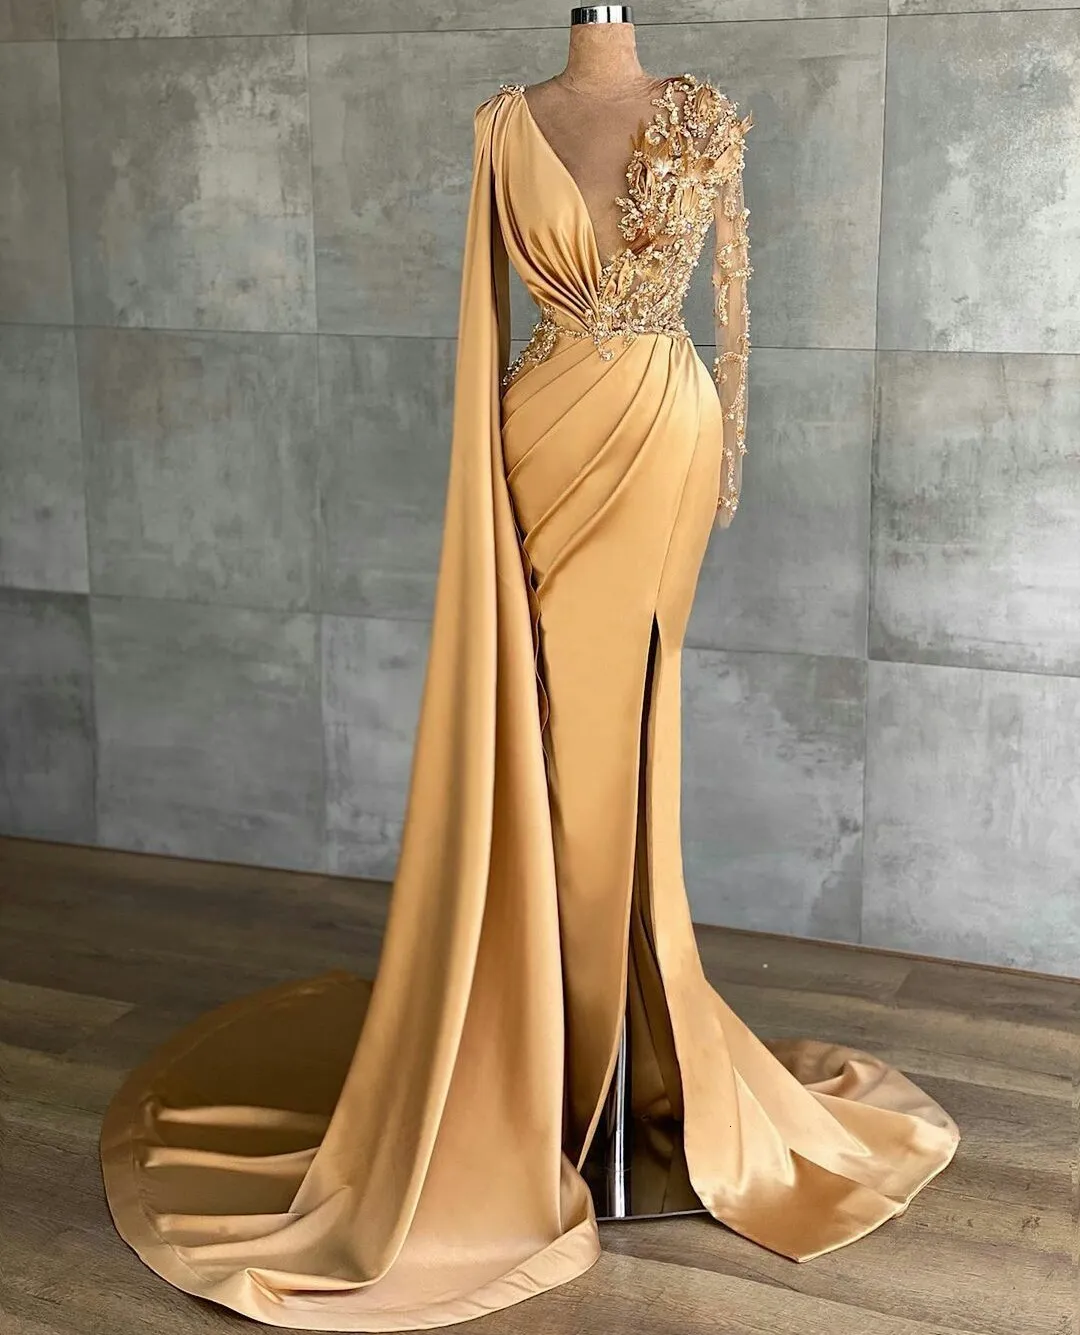 Party Dresses BridalAffair Gold Mermaid V Neck Lace Applique Long Sleeve Prom Dress Beaded Black Girl African Evening Gown robe de soiree 230307